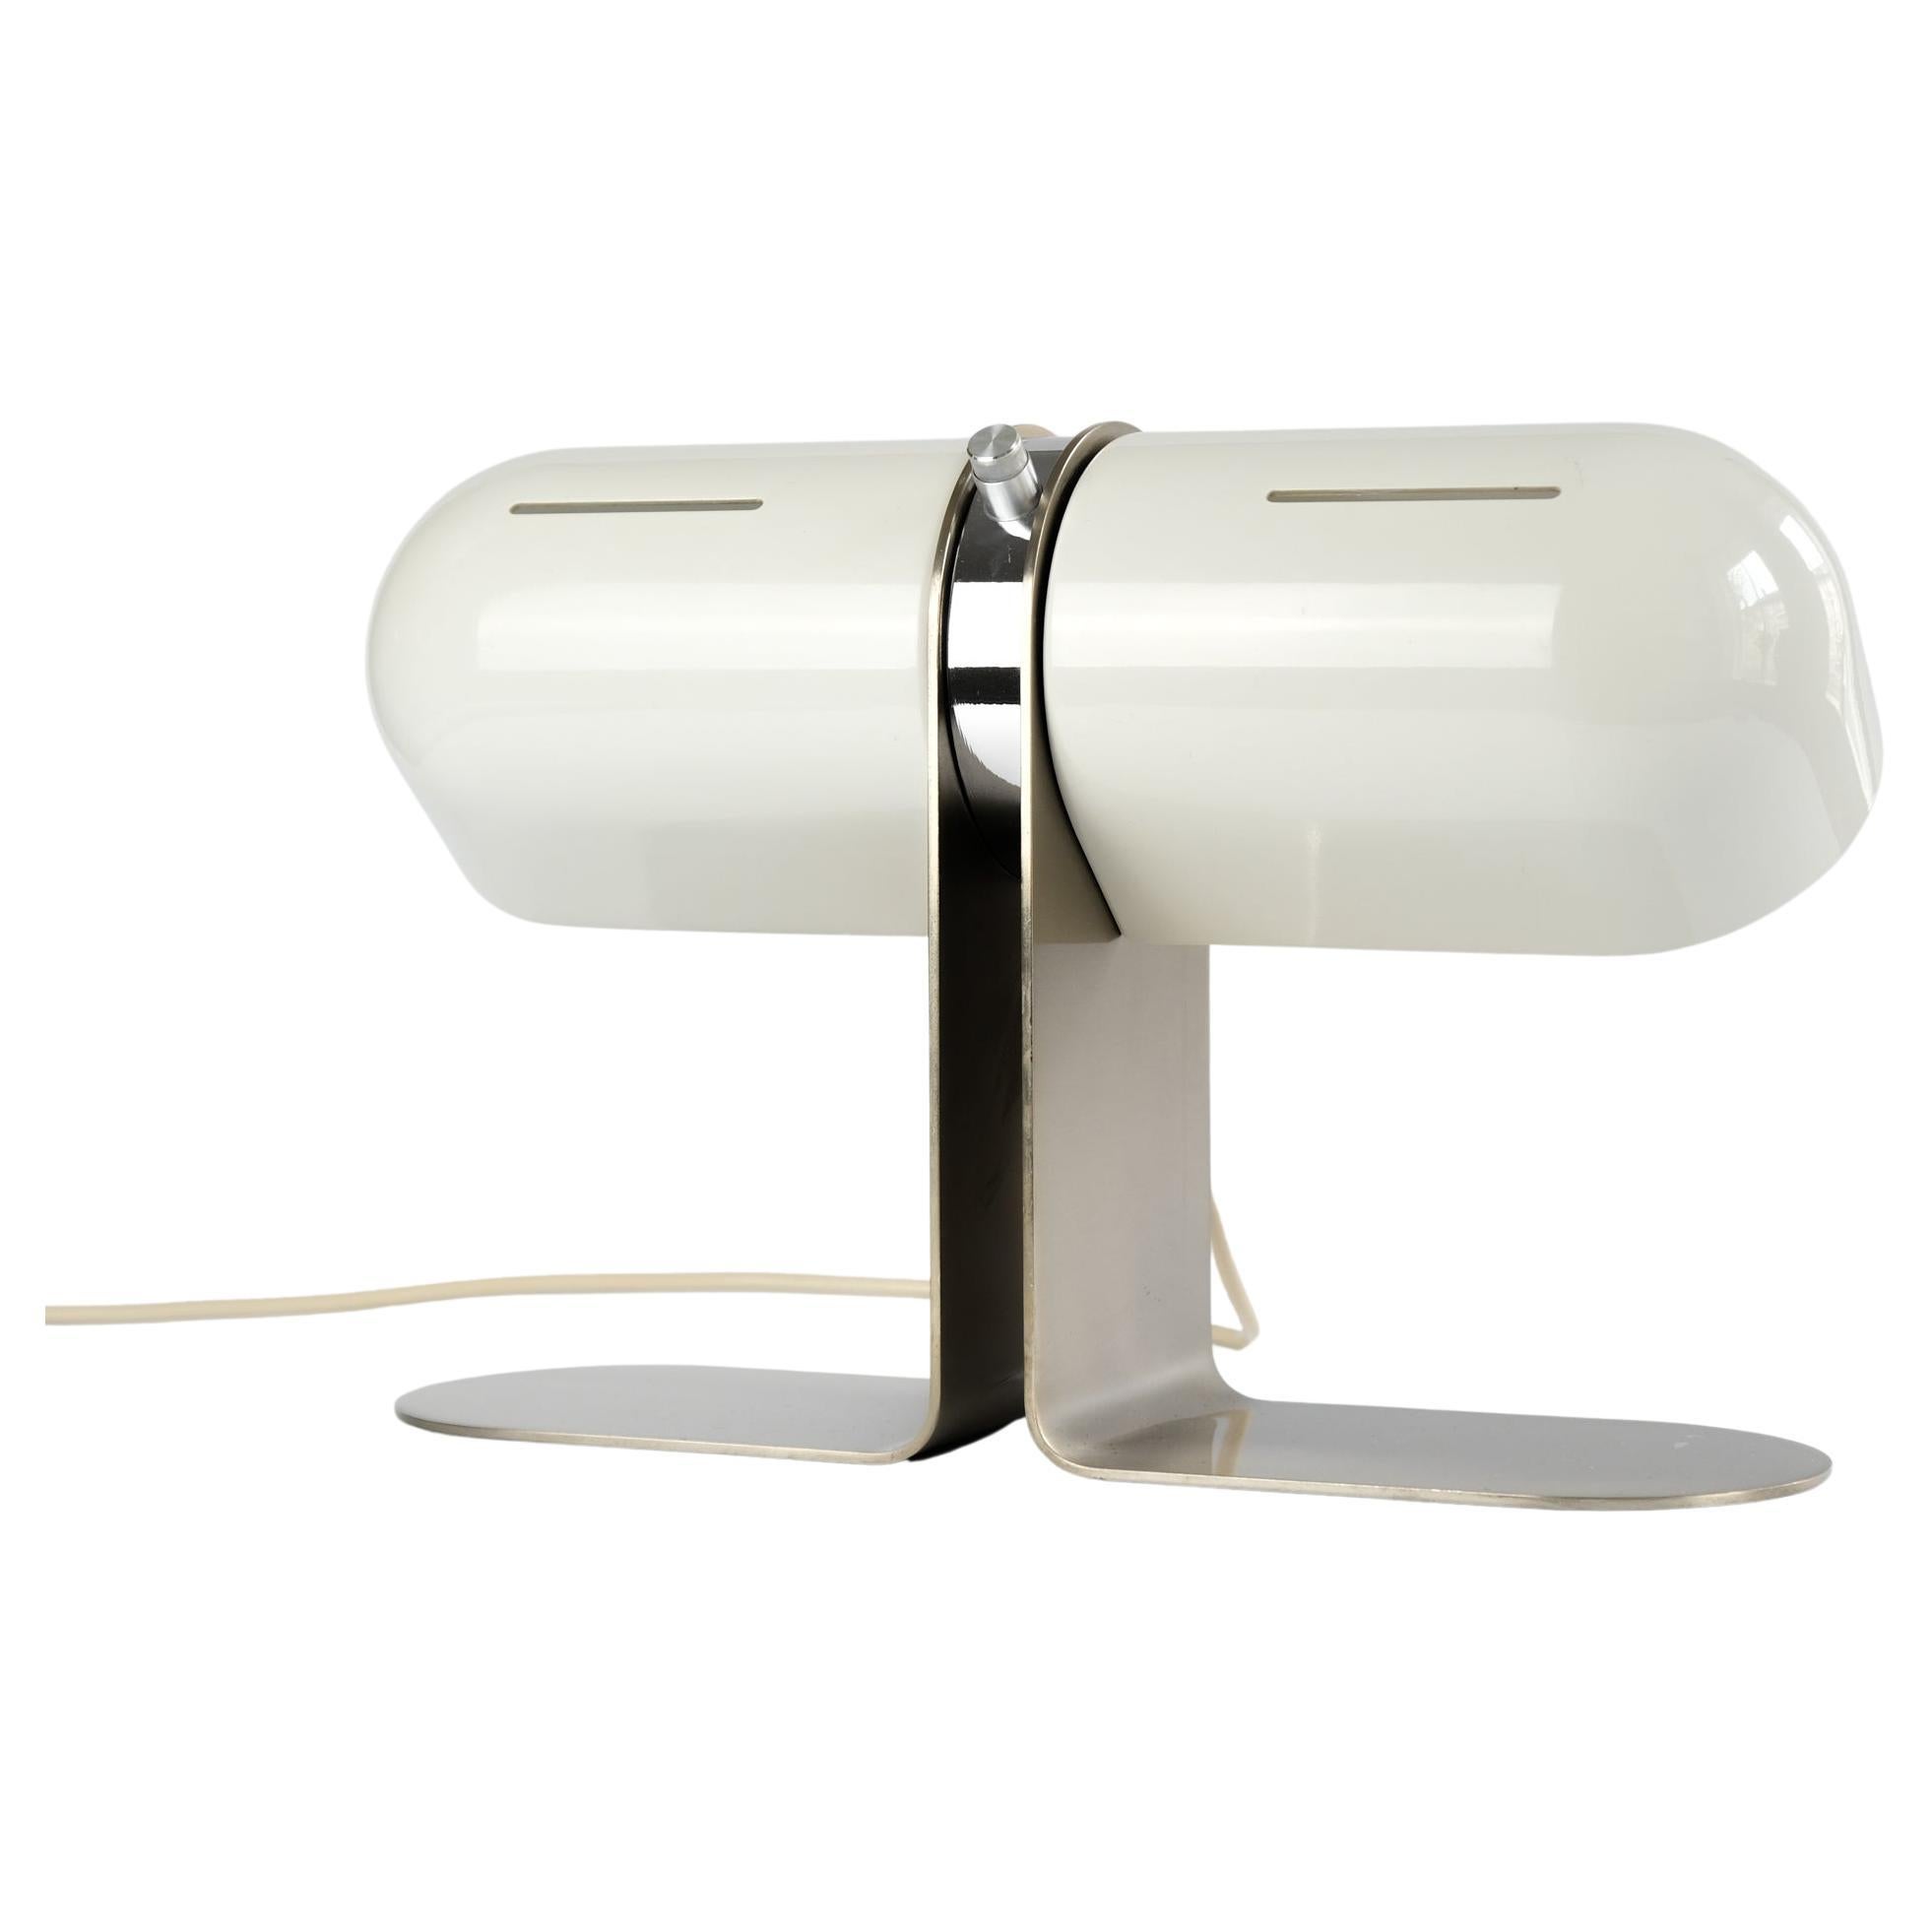 Early André Ricard Mid-Century Table Lamp For Metalarte, Spain 1973